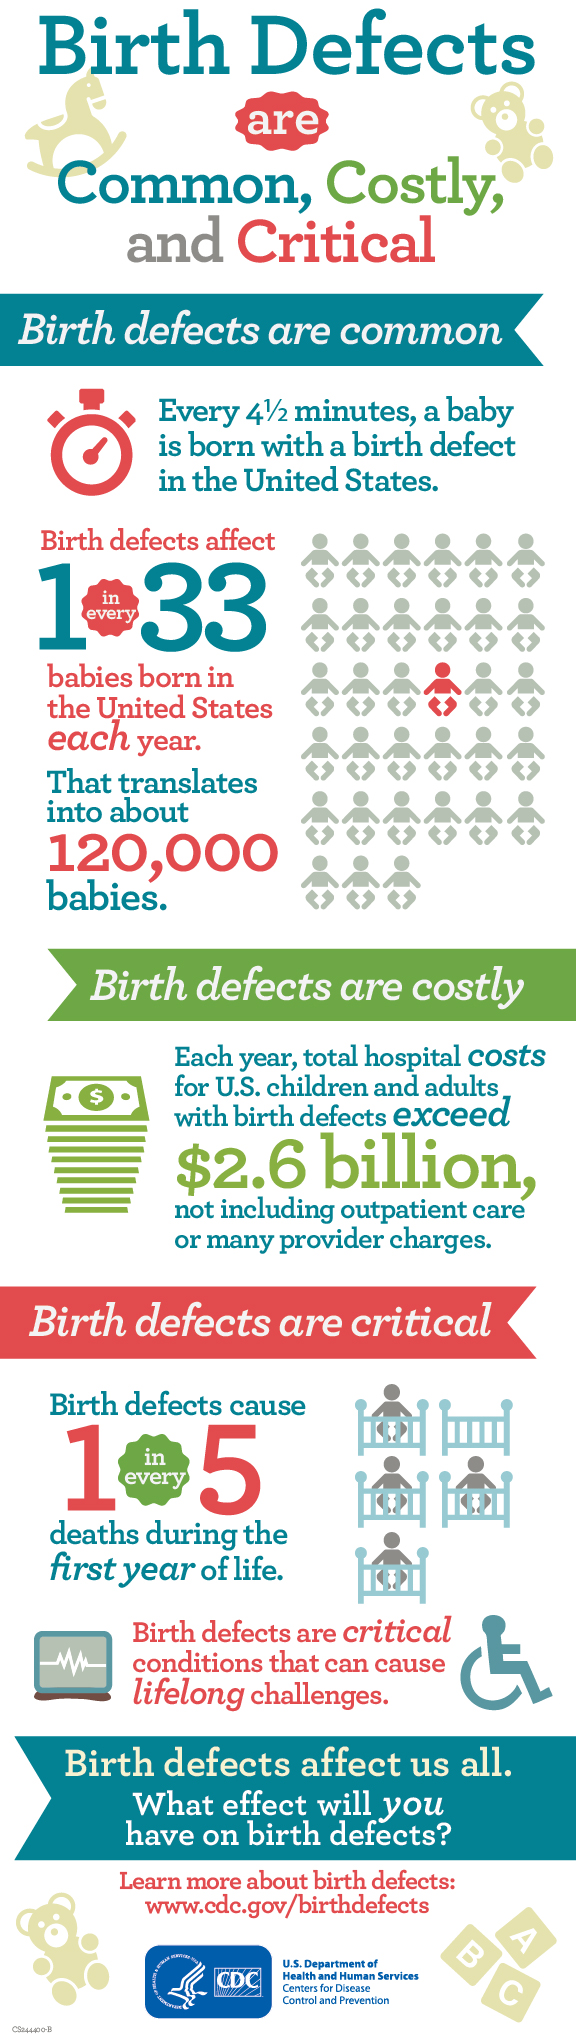 Birth Defects Trends and Stats